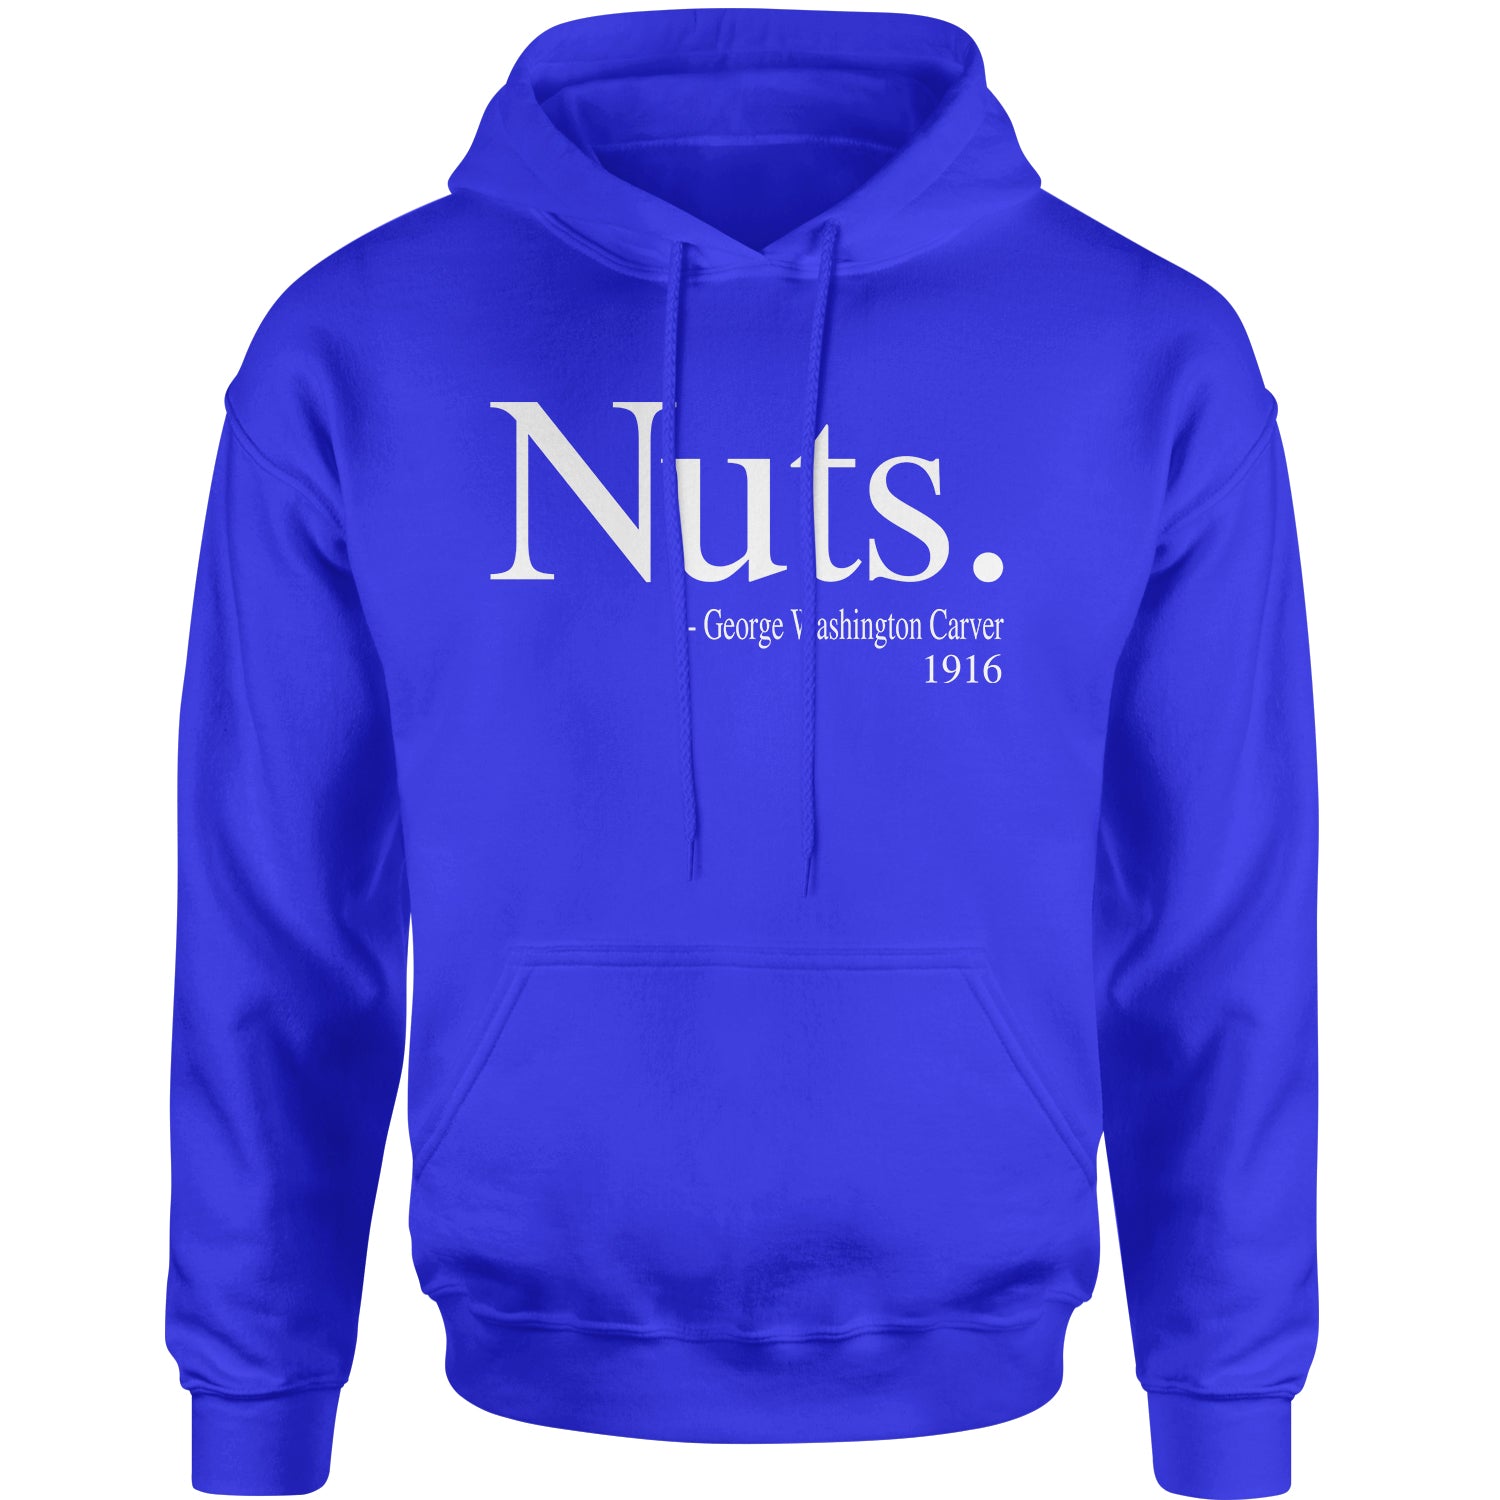 Nuts Quote George Washington Carver Adult Hoodie Sweatshirt african, african american, afro, american, black, carver, george, go, harriet, history, malcolm, me, nah, nuts, out, parks, rosa, try, tubman, washington, we, x by Expression Tees